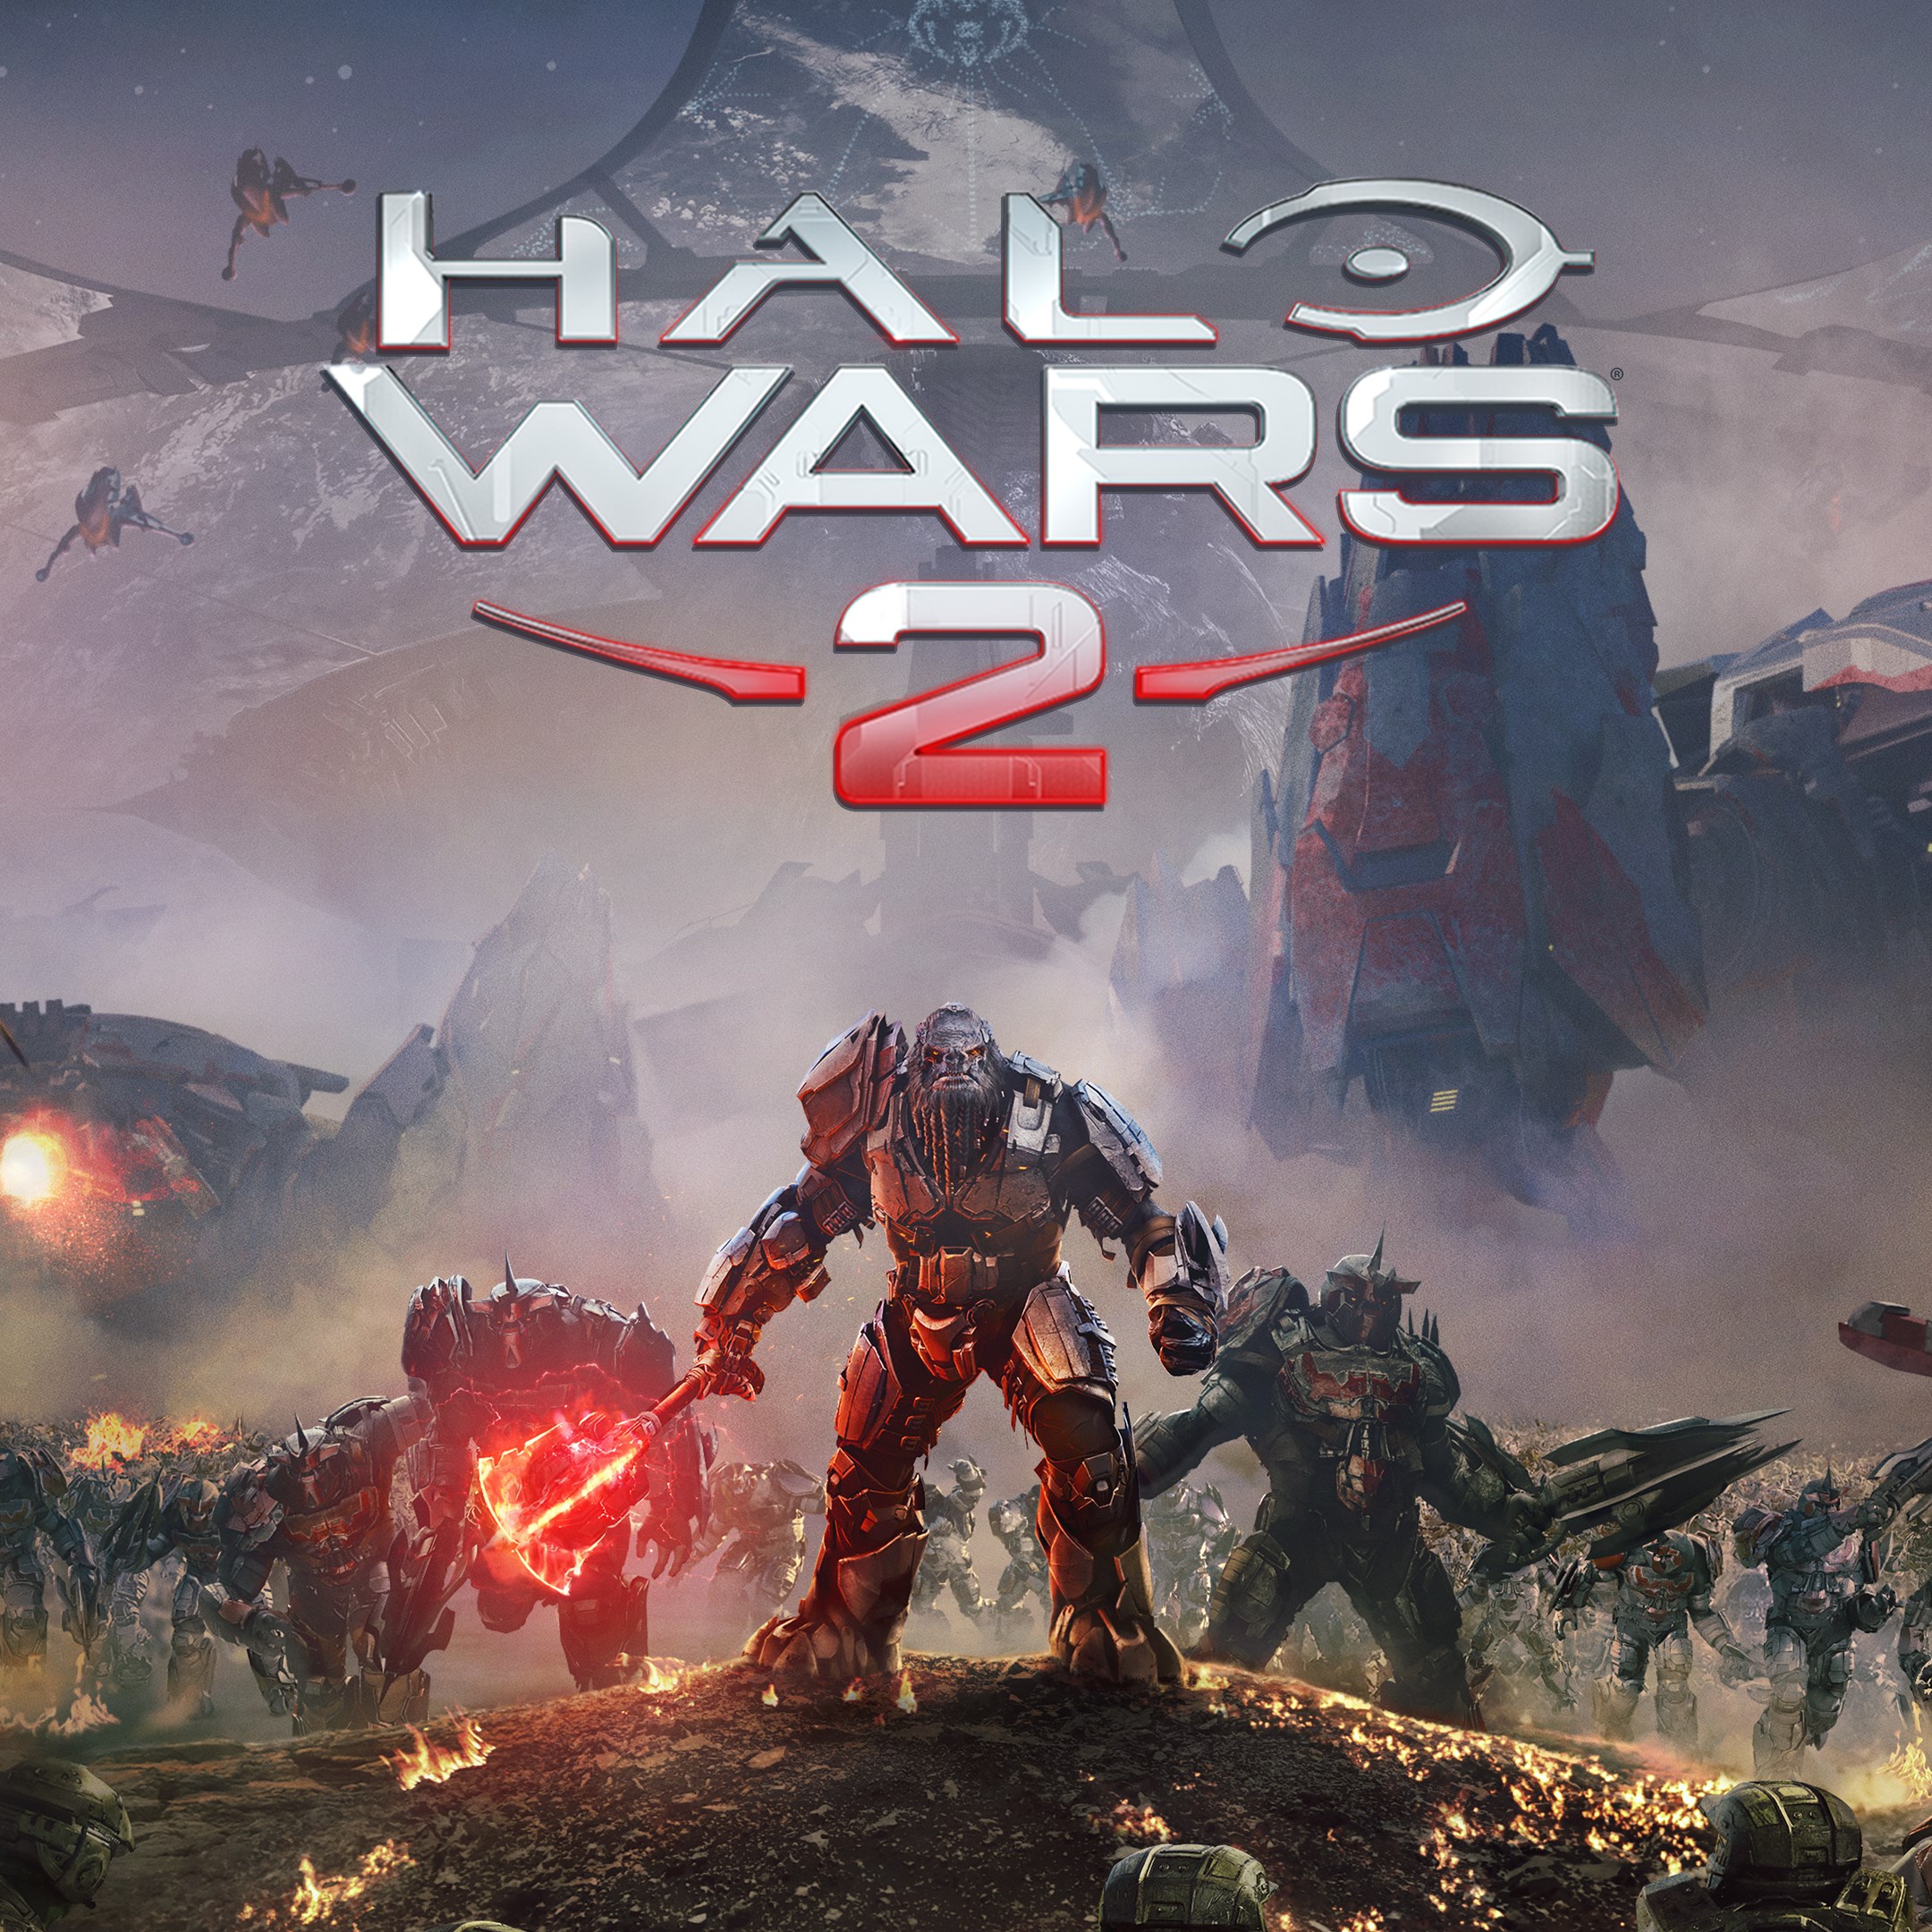 Halo Wars 2 technical specifications for computer